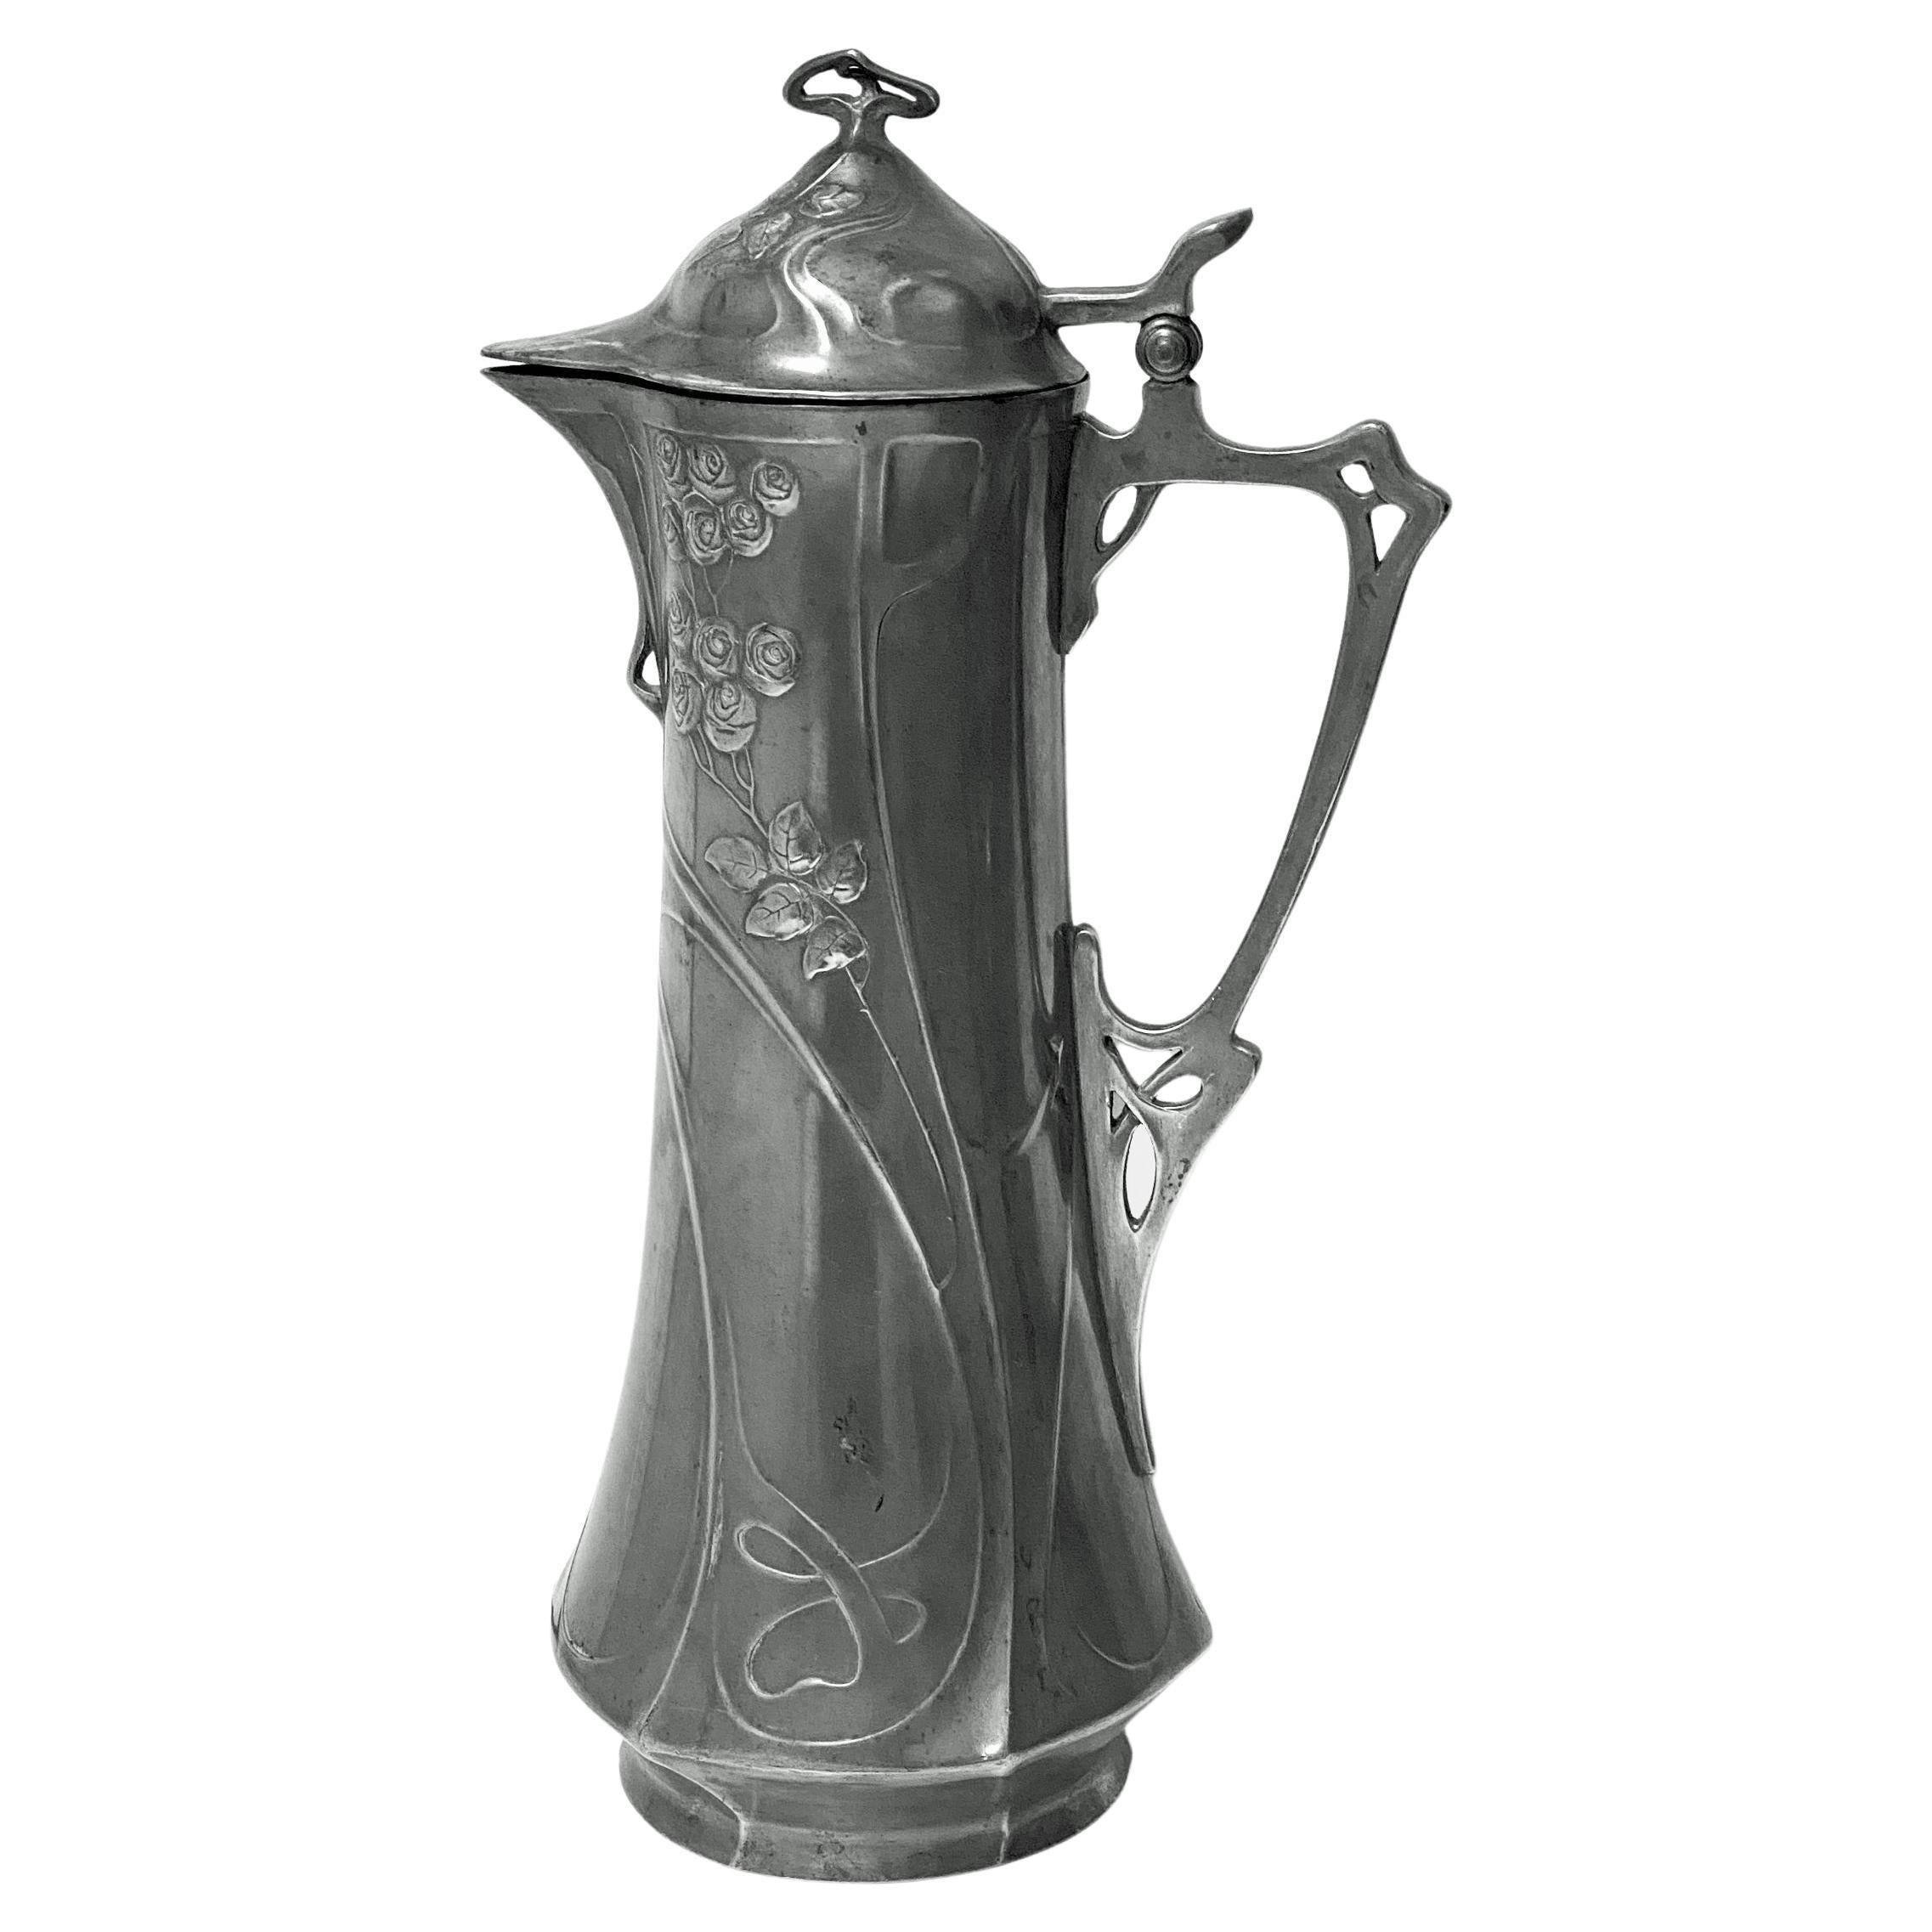 Juventa Art Nouveau Jugendstil Pewter Claret Wine Jug C.1900. Large tapering wasted body decorated with stylised roses and foliate relief, with hinged lid and stylised handle stamped Juventa to base. Height: 13.00 inches. Width:7inches. Condition: